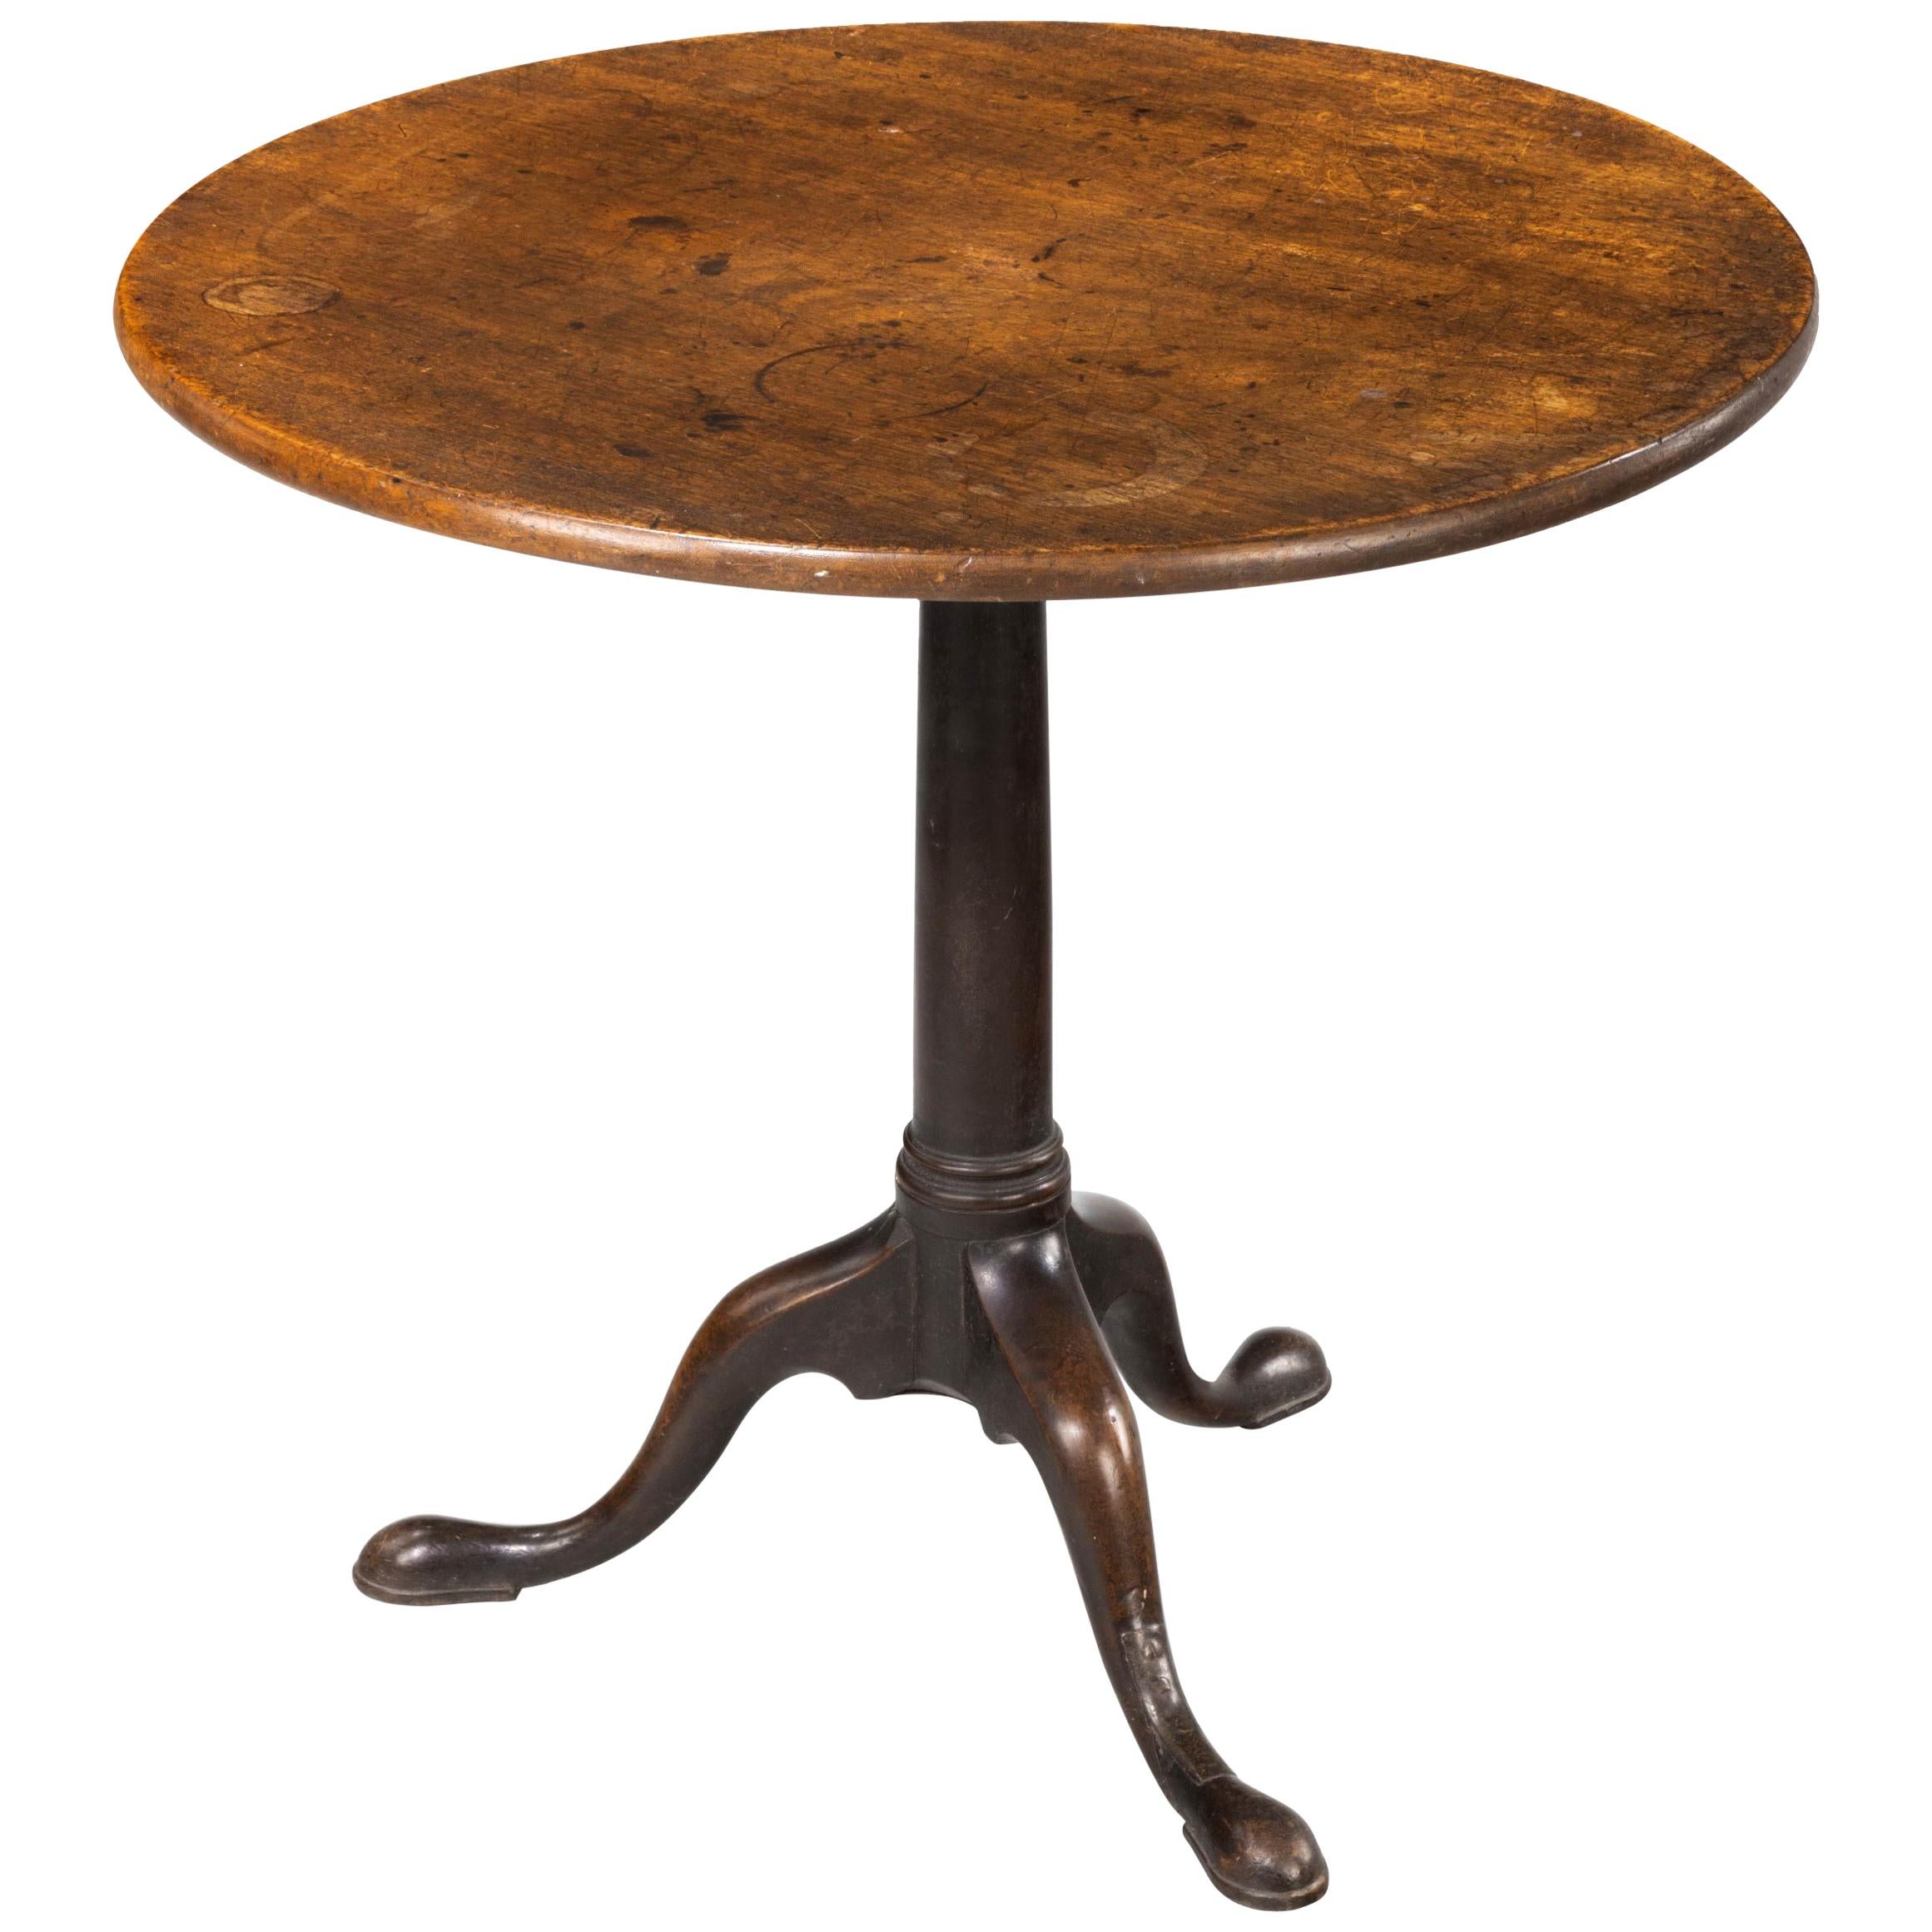 Attractive George III Period Mahogany Tilt Topped Table